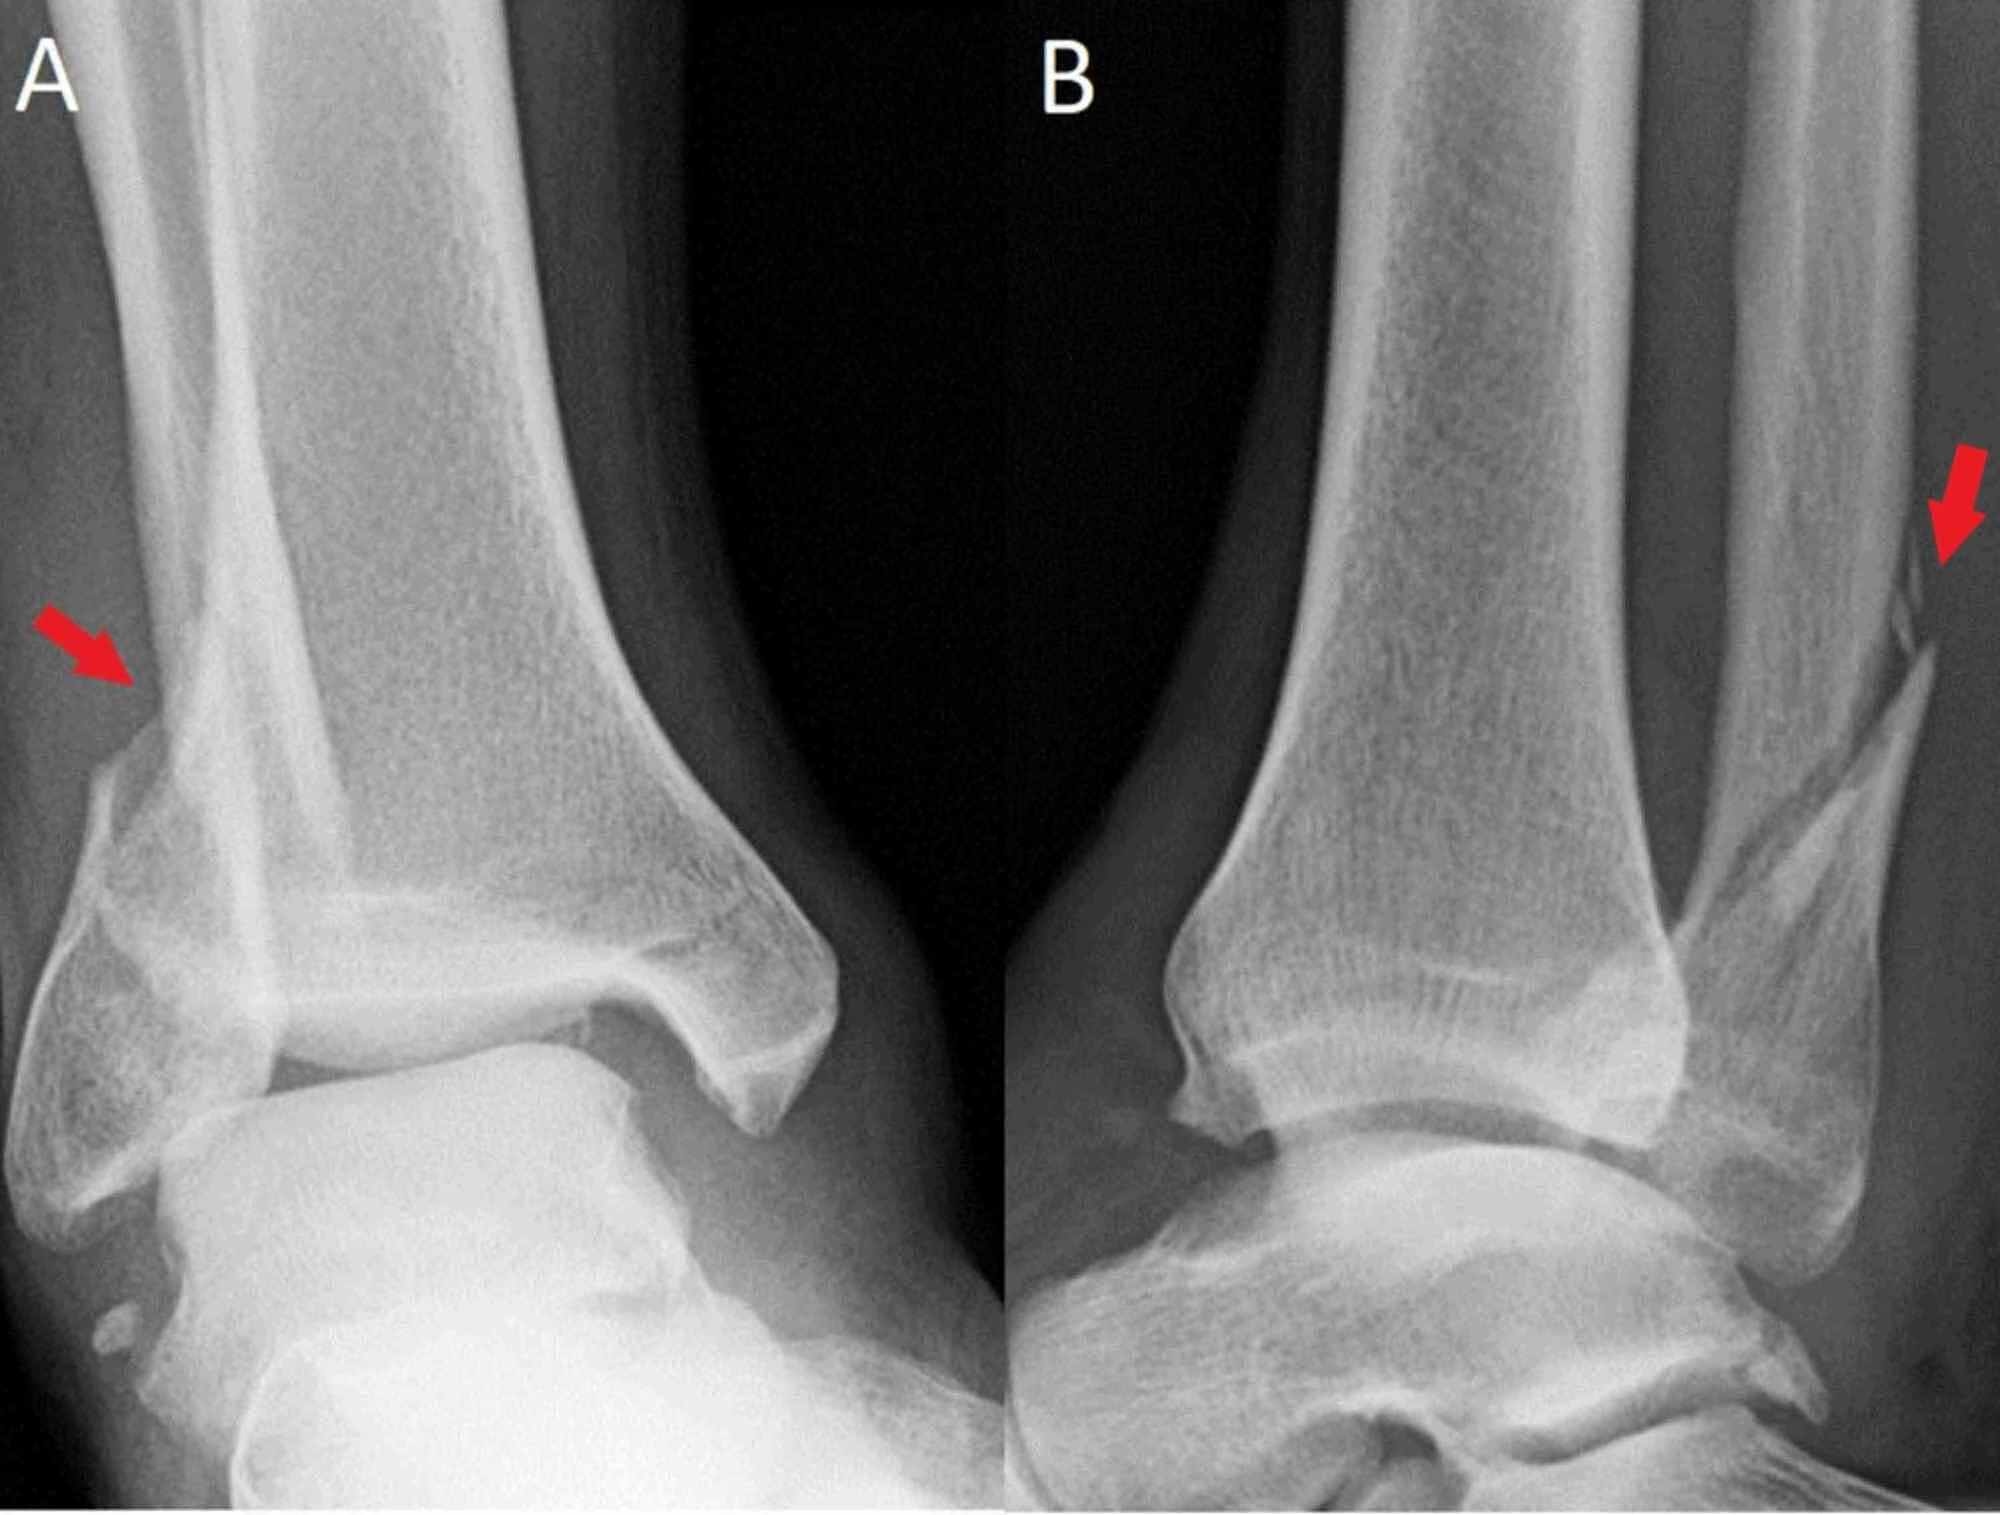 a patient underwent closed reduction of a closed fracture